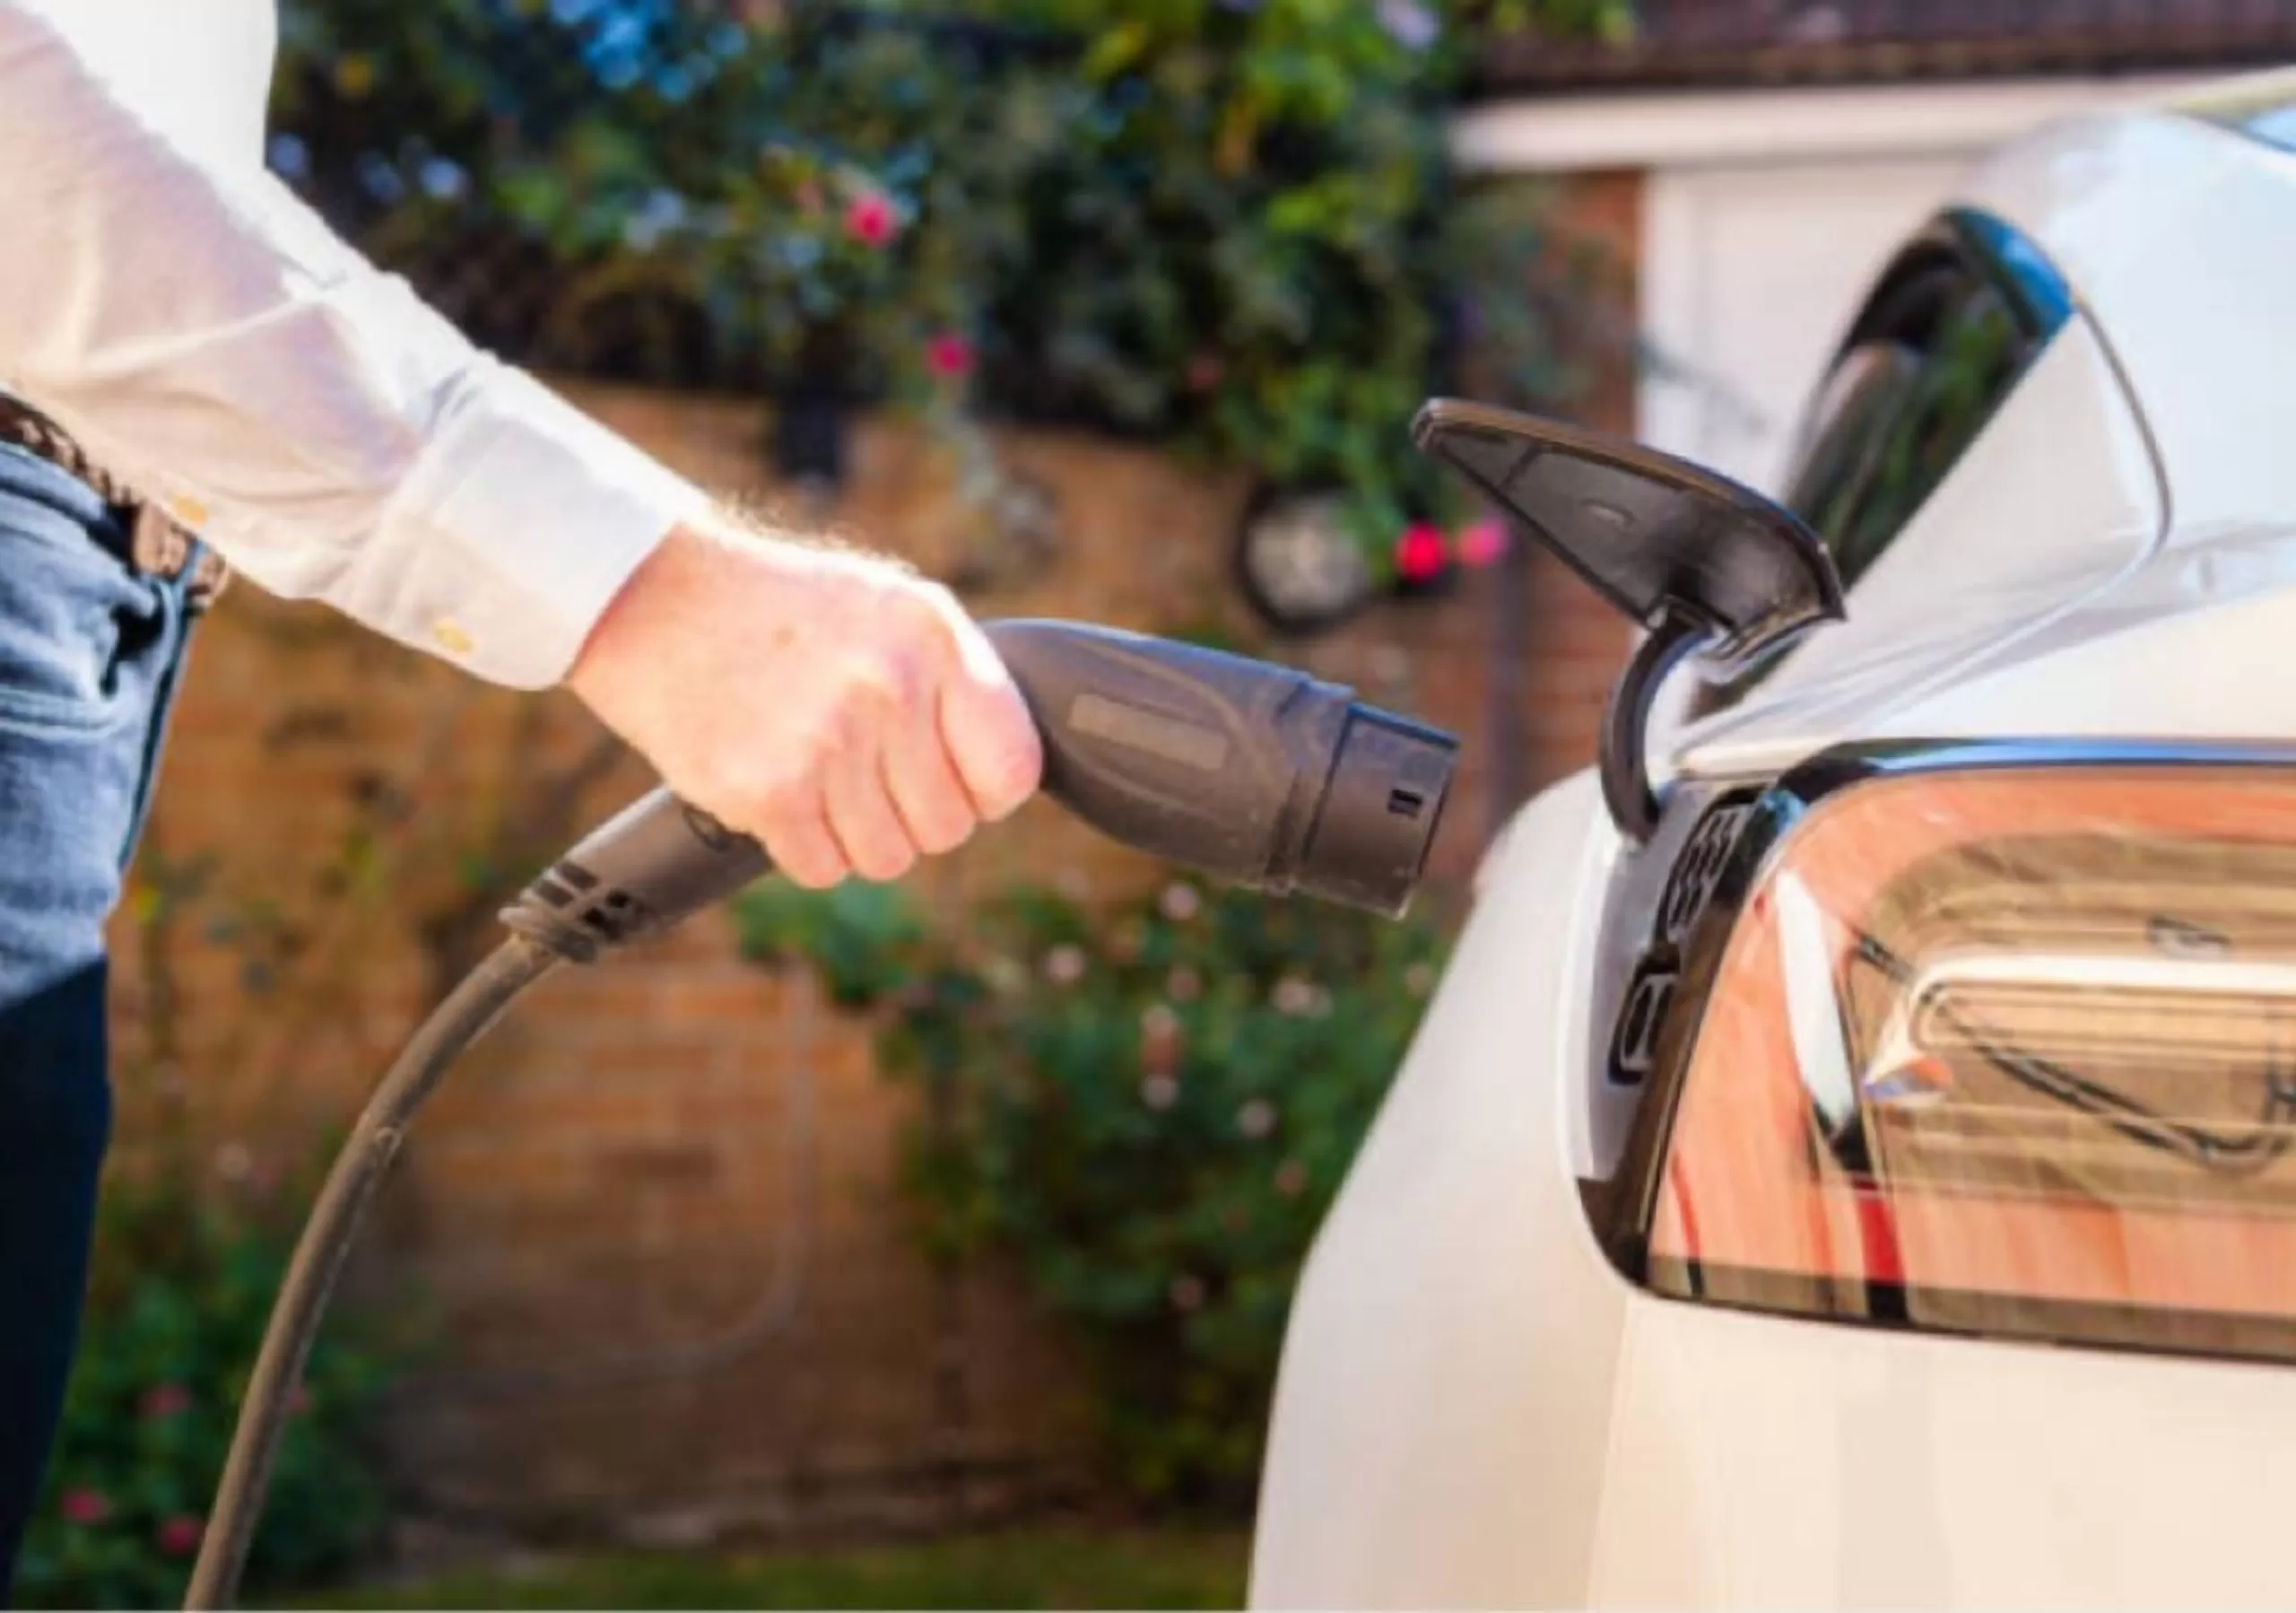 Electric vehicle charging installers